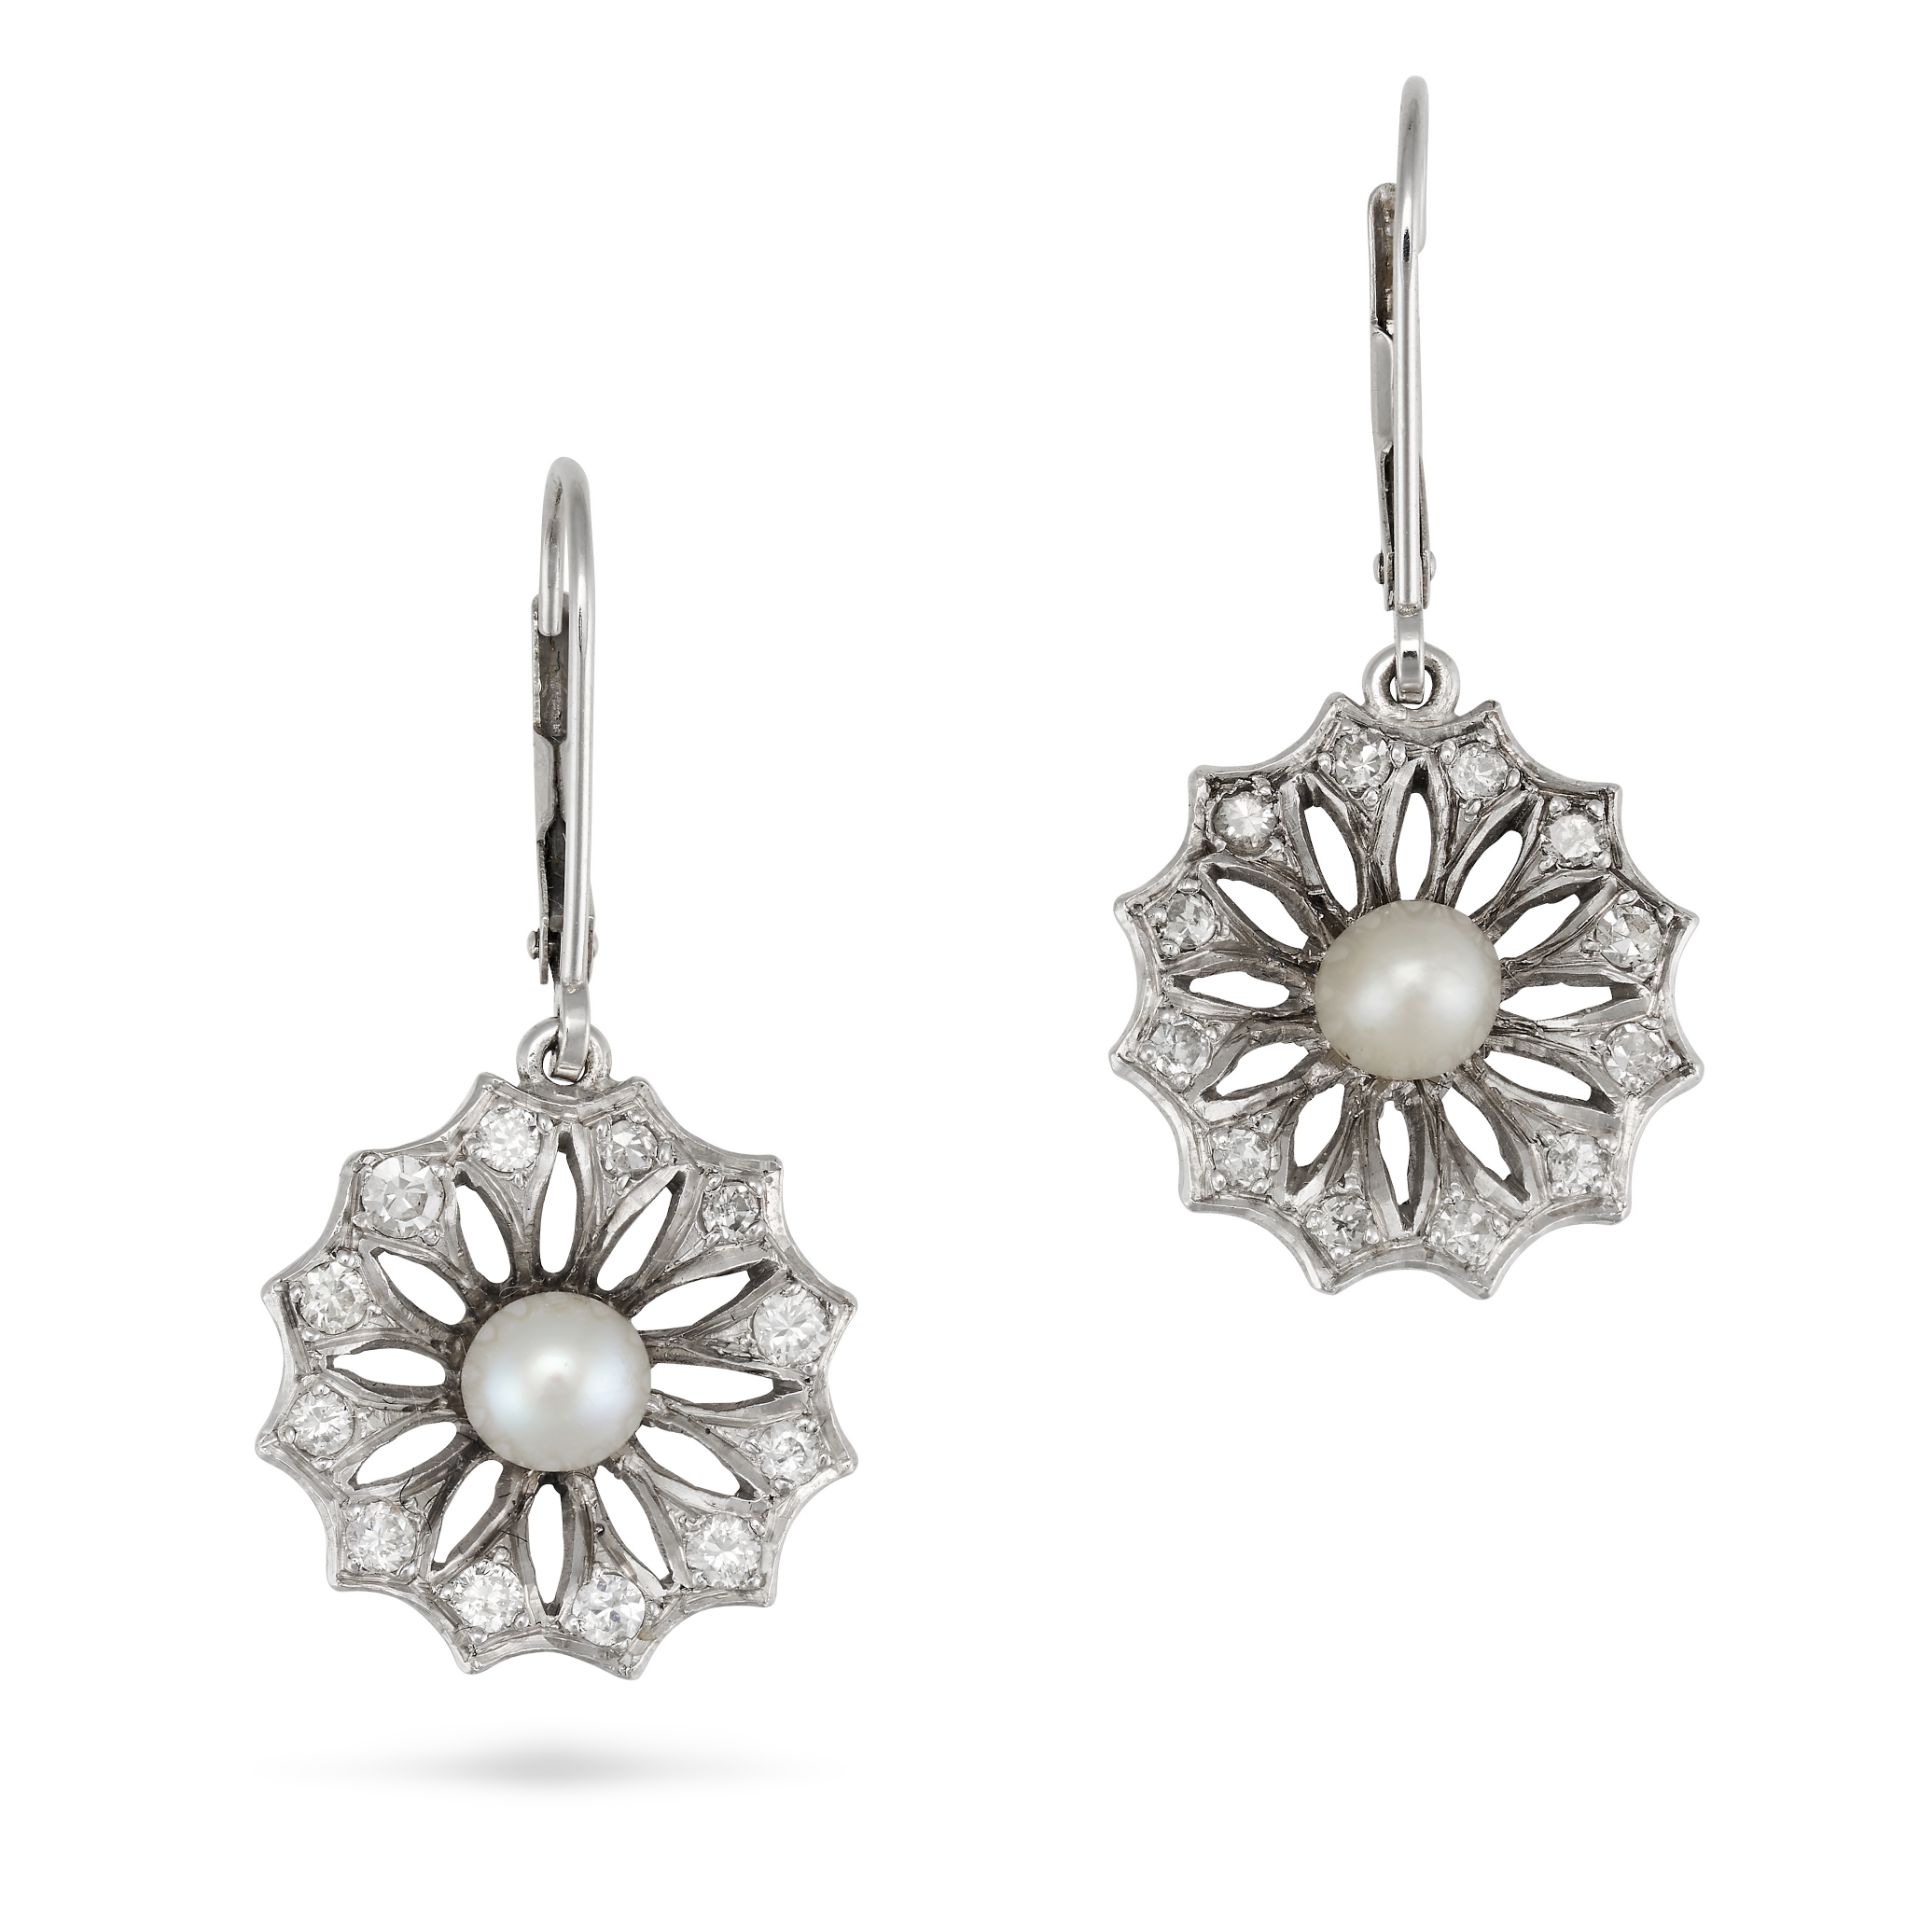 A PAIR OF DIAMOND AND PEARL EARRINGS in 9ct white gold, each earring set to the centre with a pea...